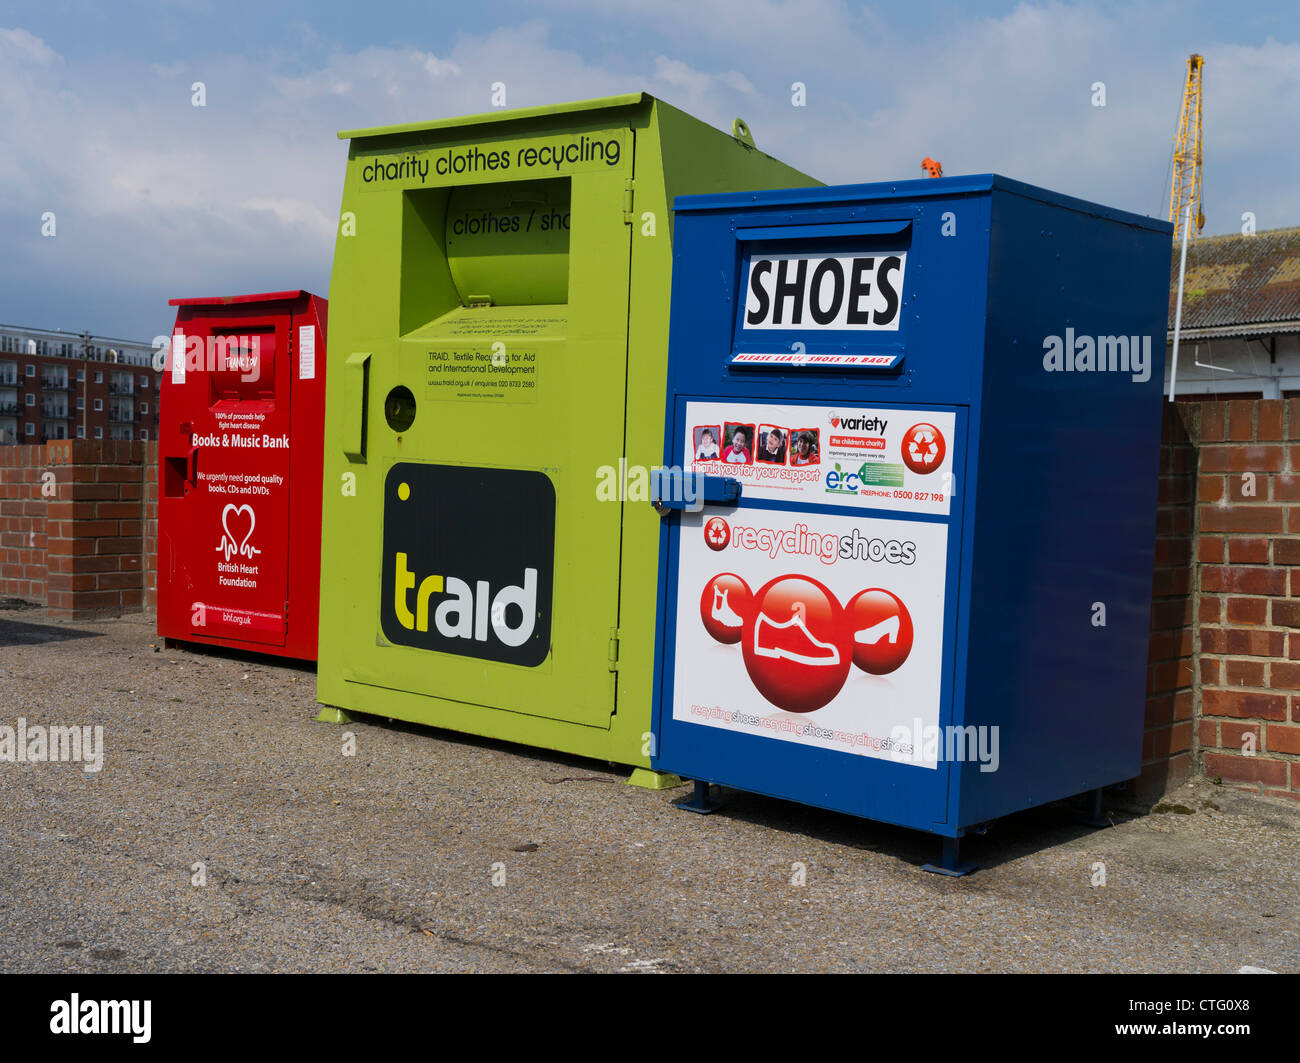 dh Recycling Bins AMBIENTE HAMPSHIRE Bin Shoes Charity collezione di vestiti Old Portsmouth Recycle Bank uk Foto Stock